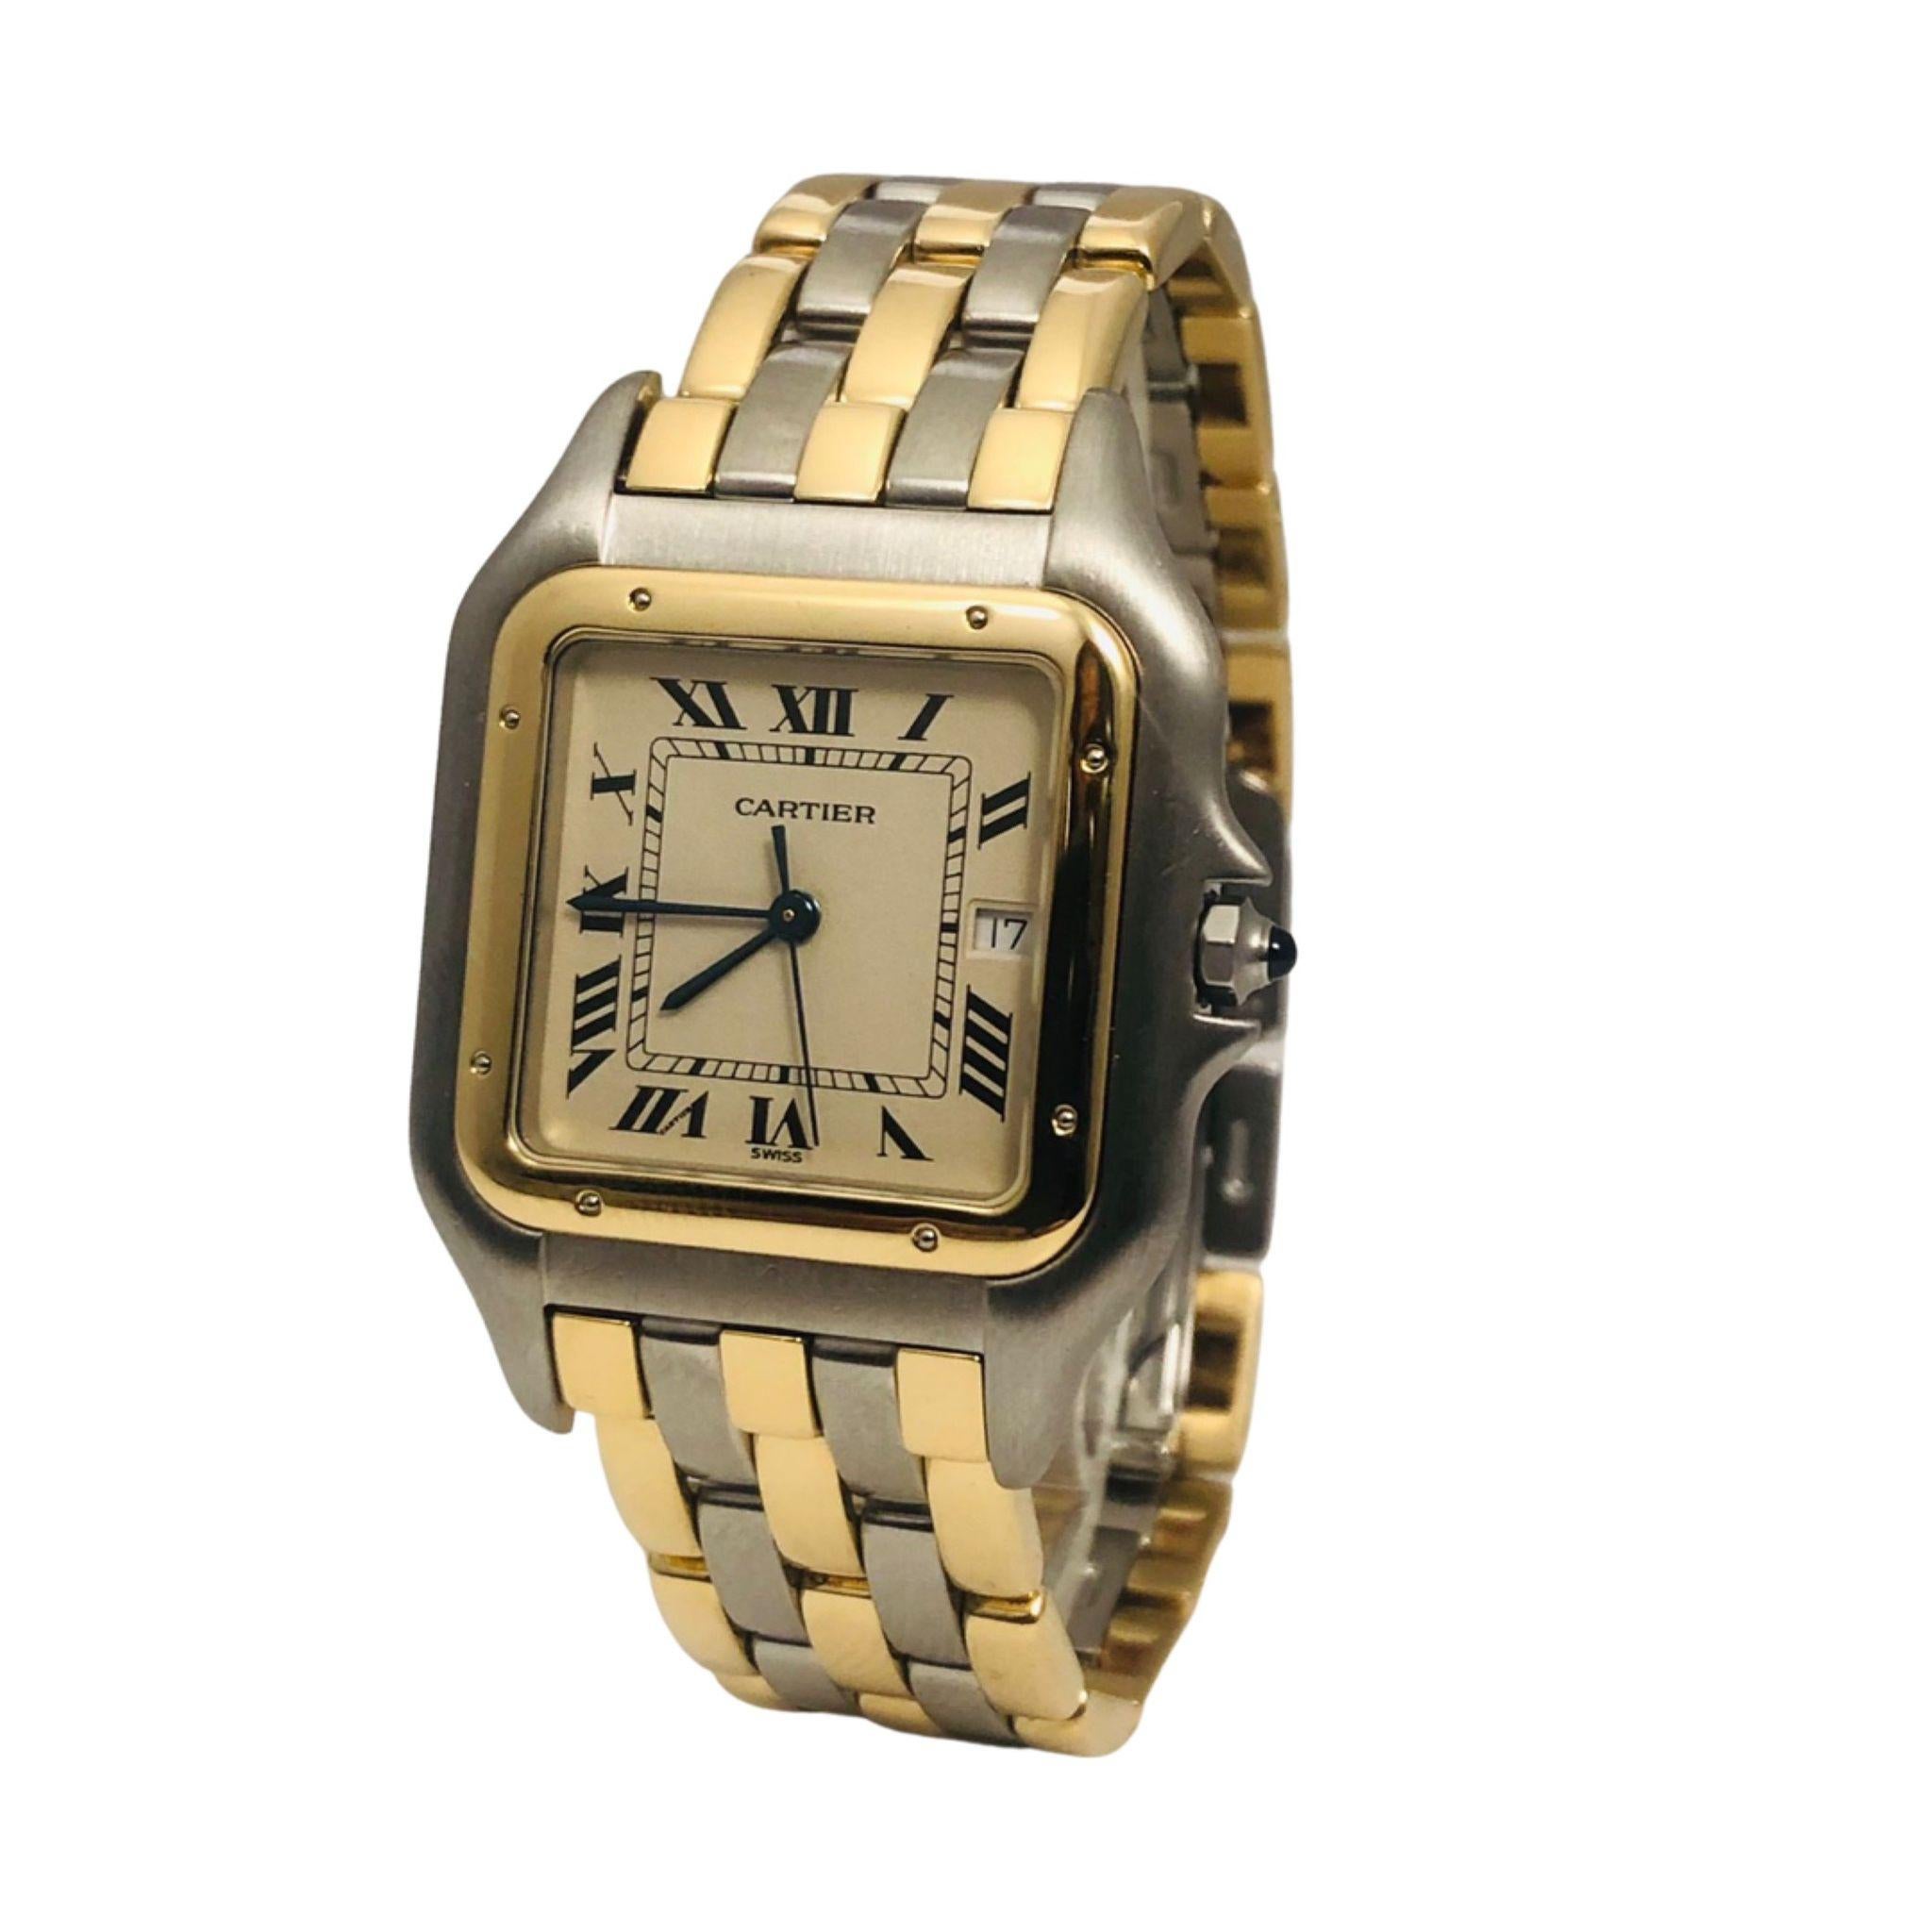 ITEM SPECIFICATION

Brand: Cartier

Model: Panthere De Cartier

Movement: Quartz

Case Size: 27mm

Dial: Roman Numeral; Champagne

Case Material: Stainless Steel/Yellow Gold

Bracelet Material: Stainless Steel/Yellow Gold

Crystal: Scratch-Resistant